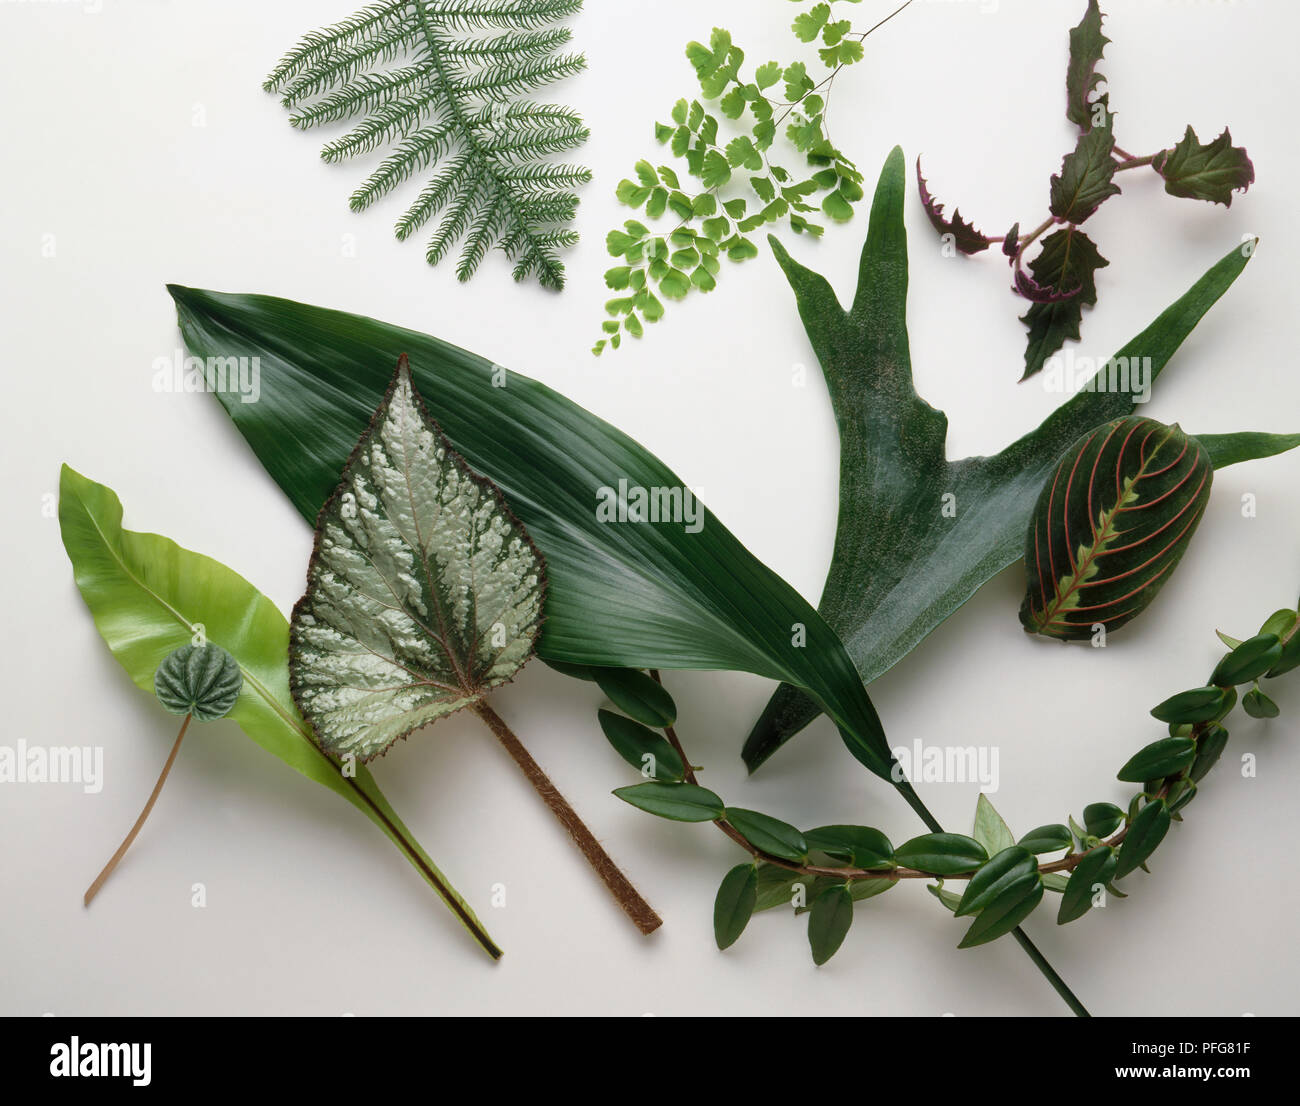 Collection of leaves from indoor plants, including Norfolk Island pine, Cast-iron plant, Bird's nest fern, Emerald ripple peperomia, Painted-leaf begonia, Maidenhair fern, Staghorn fern, Purple velvet plant, Red herringbone plant, Columnea 'Banksii' Stock Photo